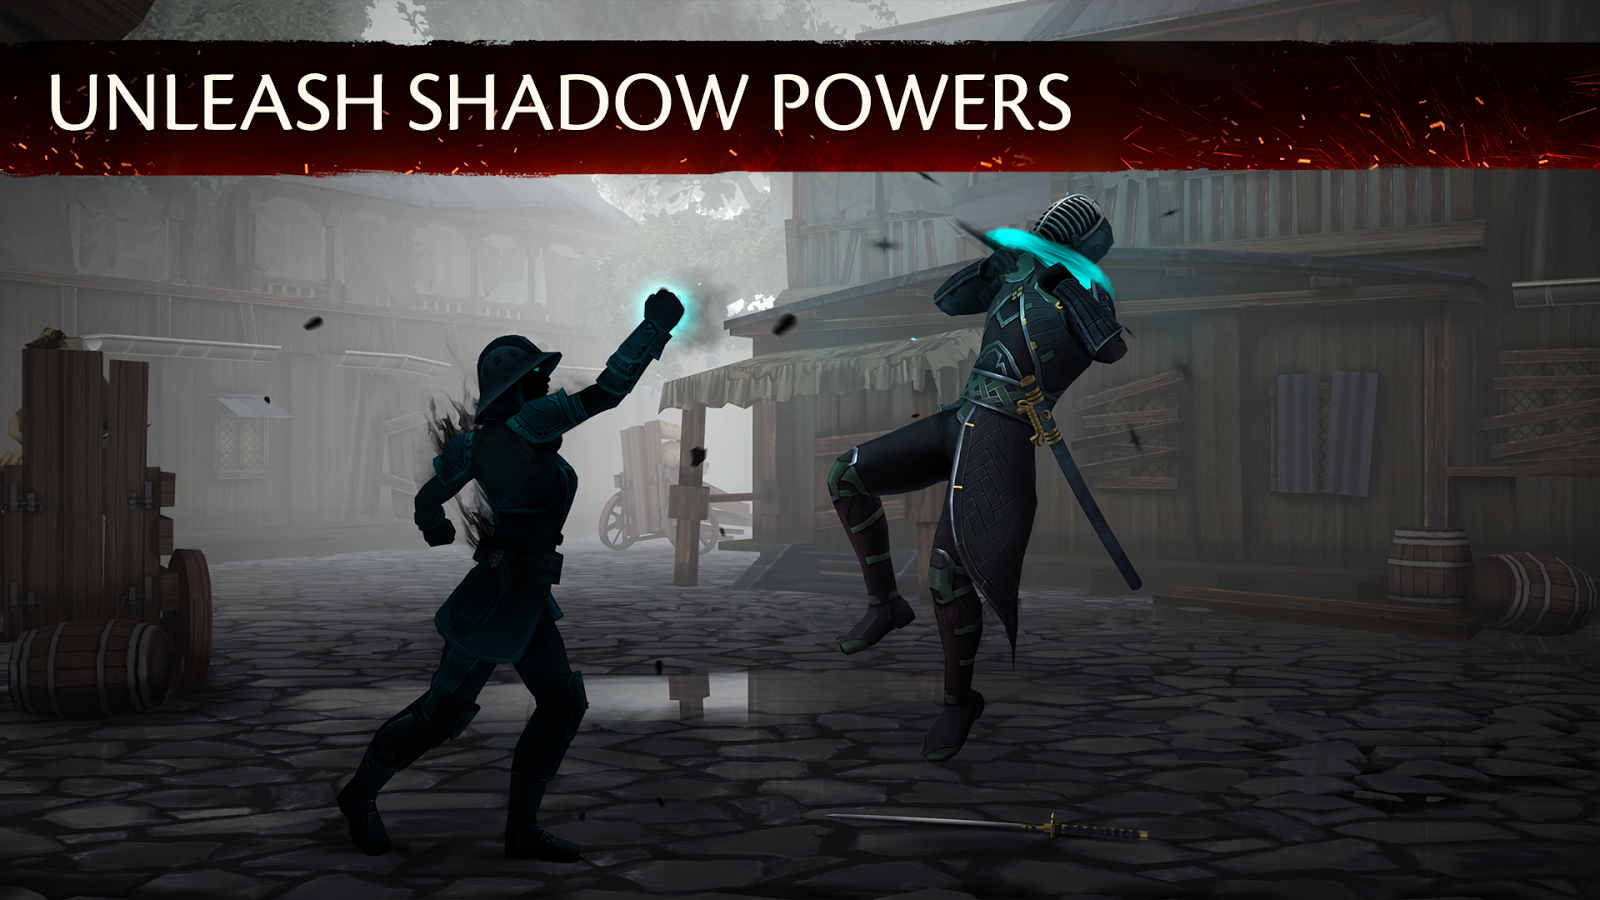 shadow fight 4 download